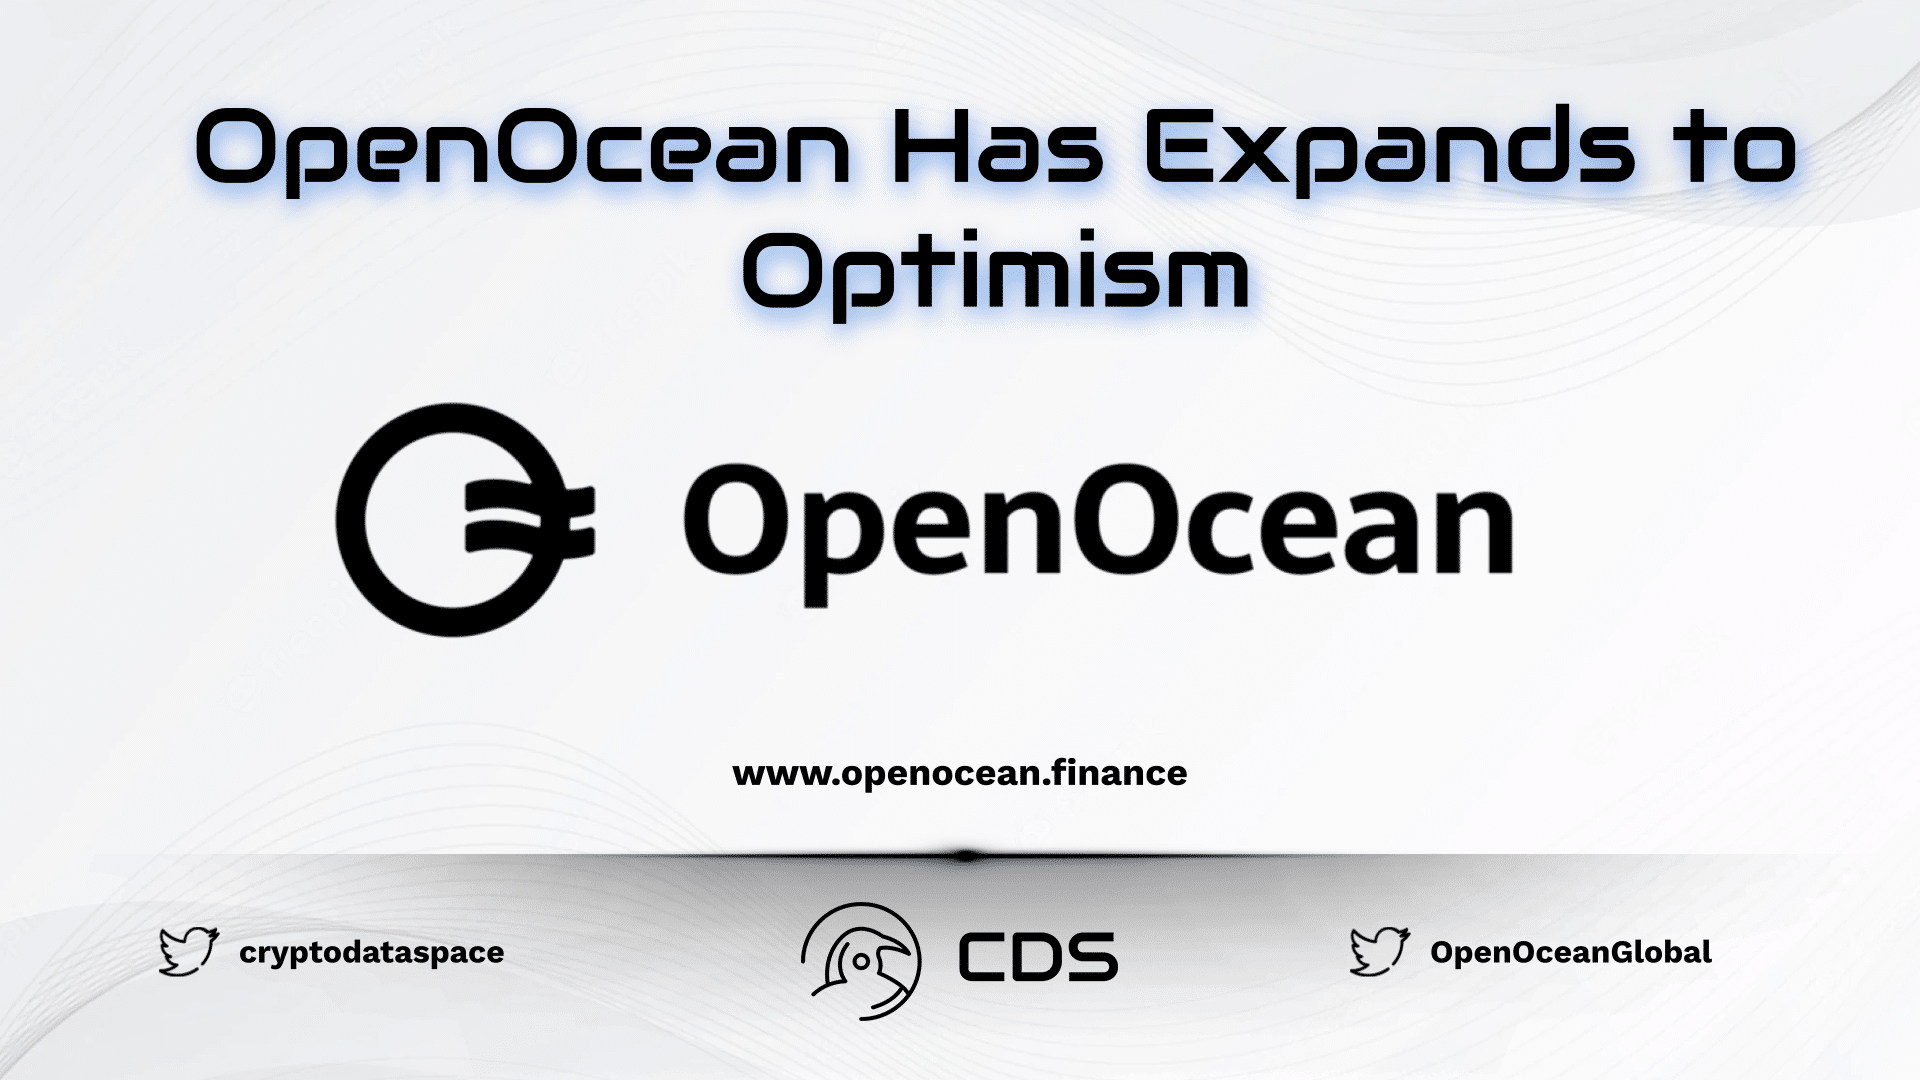 OpenOcean Has Expands to Optimism